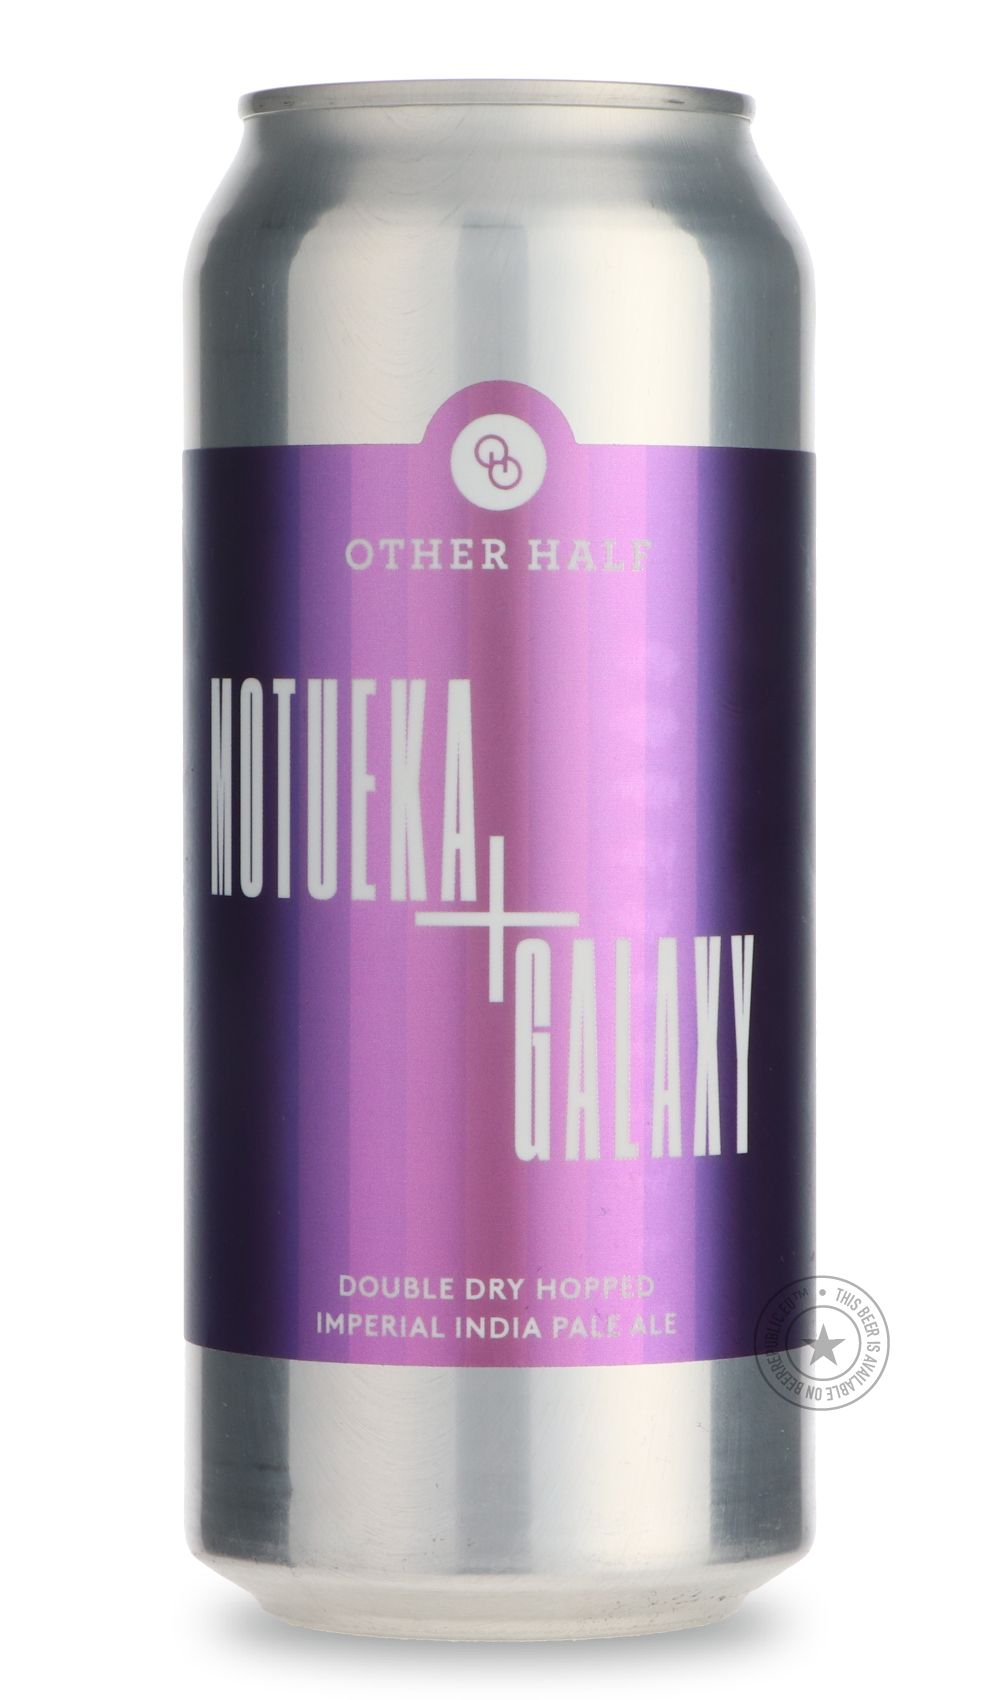 -Other Half- Motueka + Galaxy-IPA- Only @ Beer Republic - The best online beer store for American & Canadian craft beer - Buy beer online from the USA and Canada - Bier online kopen - Amerikaans bier kopen - Craft beer store - Craft beer kopen - Amerikanisch bier kaufen - Bier online kaufen - Acheter biere online - IPA - Stout - Porter - New England IPA - Hazy IPA - Imperial Stout - Barrel Aged - Barrel Aged Imperial Stout - Brown - Dark beer - Blond - Blonde - Pilsner - Lager - Wheat - Weizen - Amber - Bar